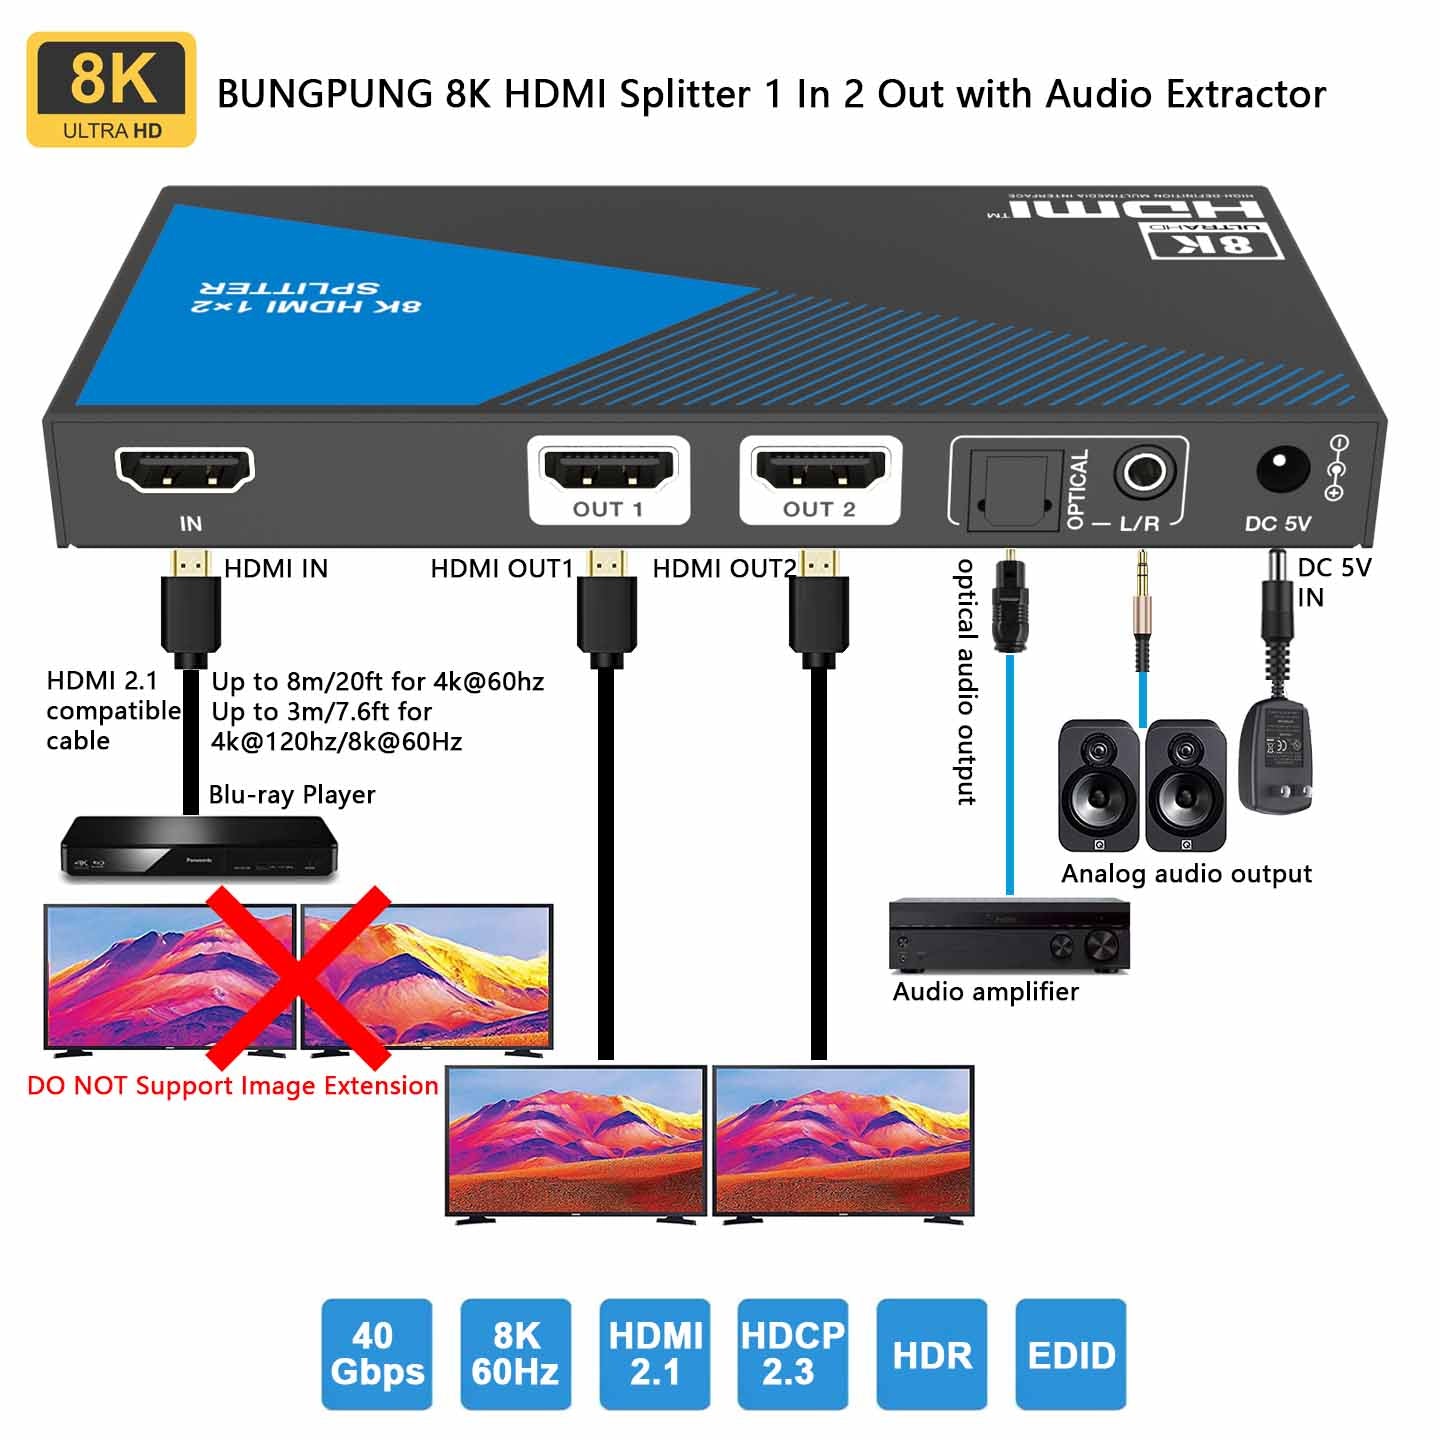 8K HDMI Splitter 1 in 2 out Audio Extractor connection